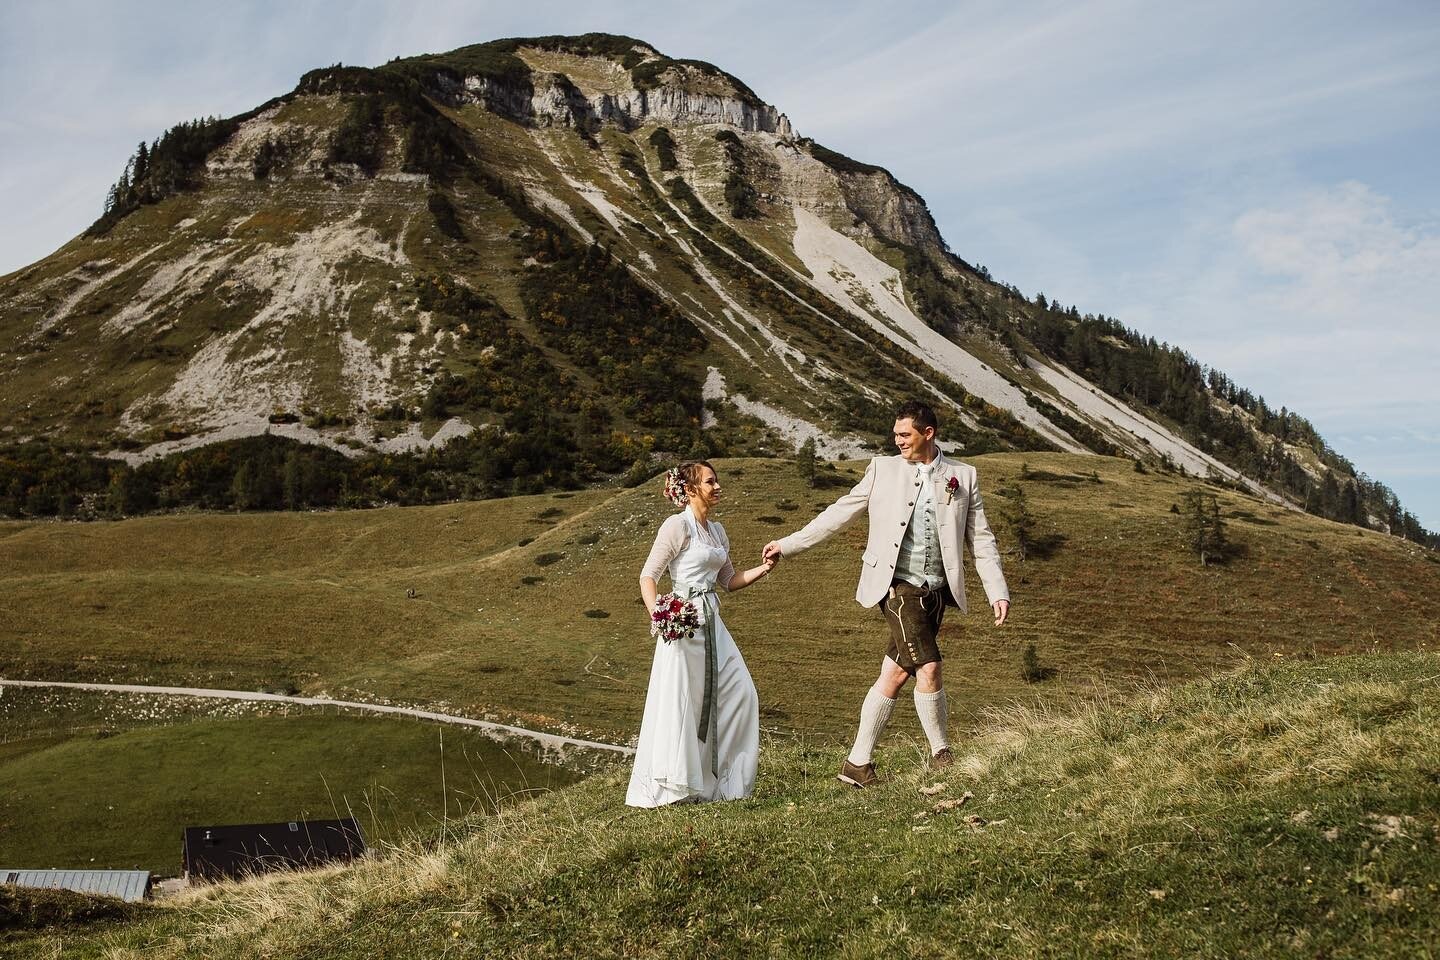 .

Come away with me and we&prime;ll kiss
On a mountain top
Come away with me
And I'll never stop loving you

(Norah Jones)
.
.
.
.
#mountaintop #comeawaywithme #heiraten #hochzeit #heiratenintracht #berghochzeit #almhochzeit #almhochzeit2022 #tracht